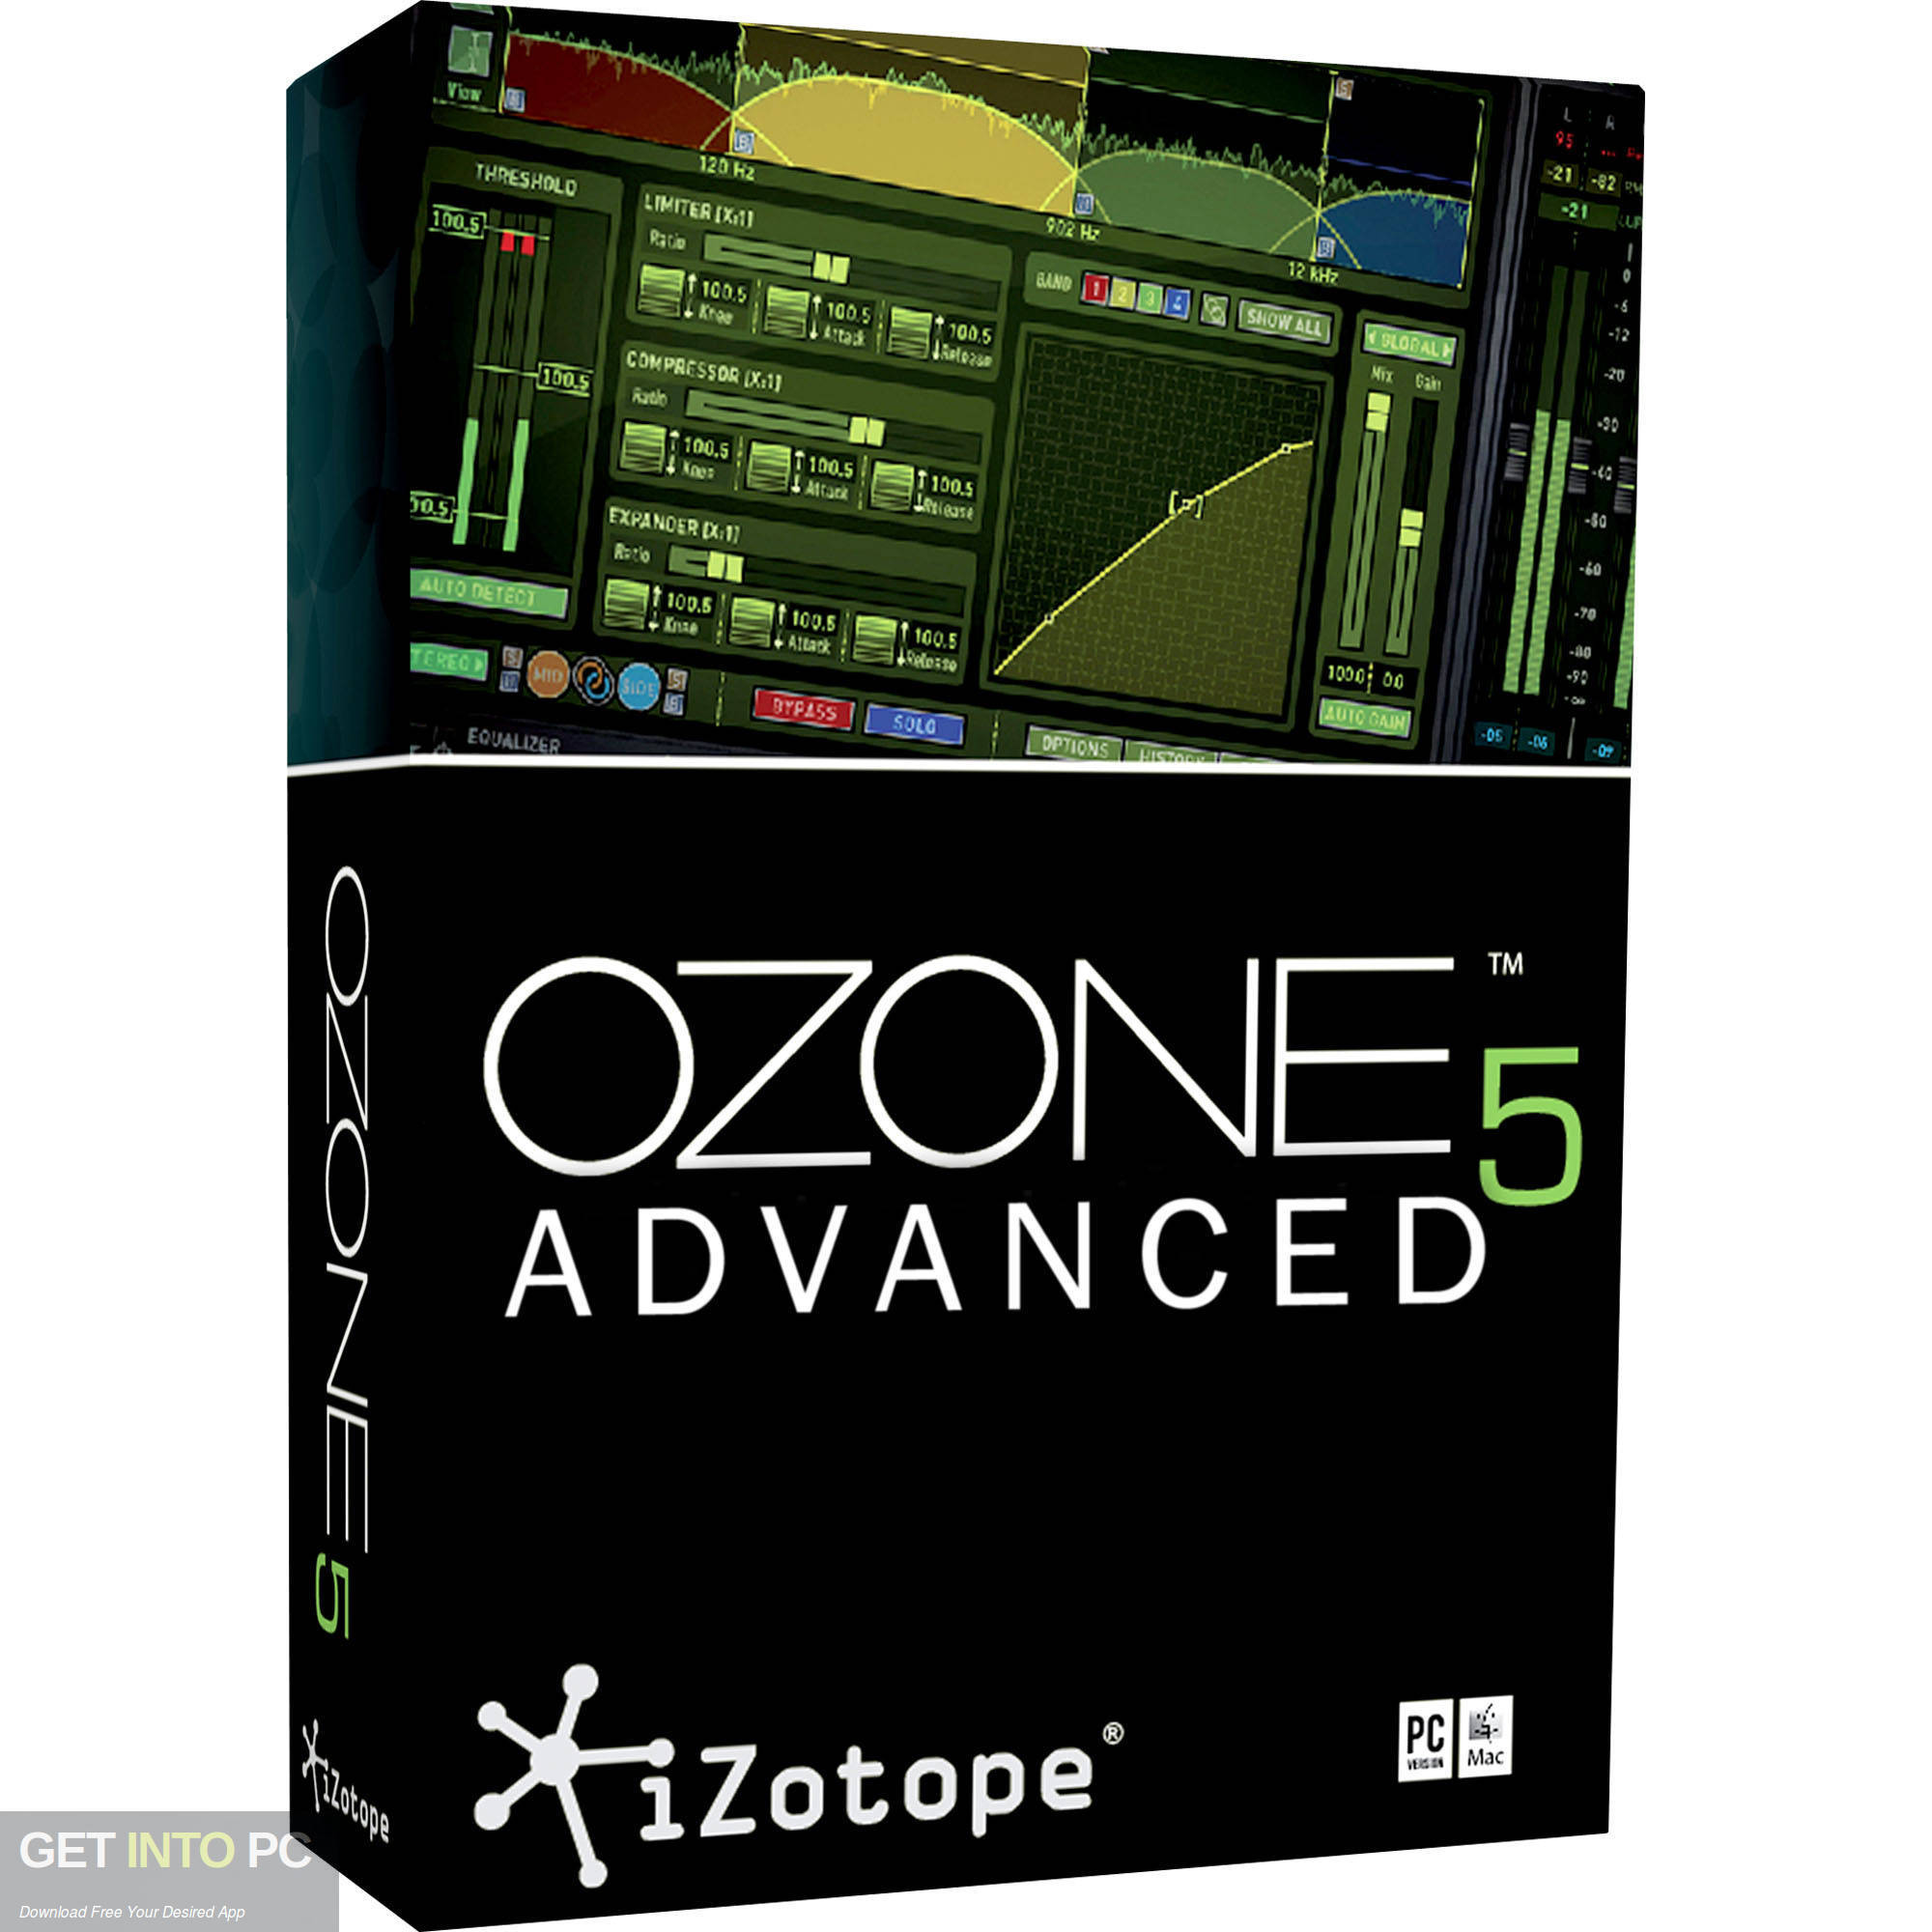 Izotope free trial download